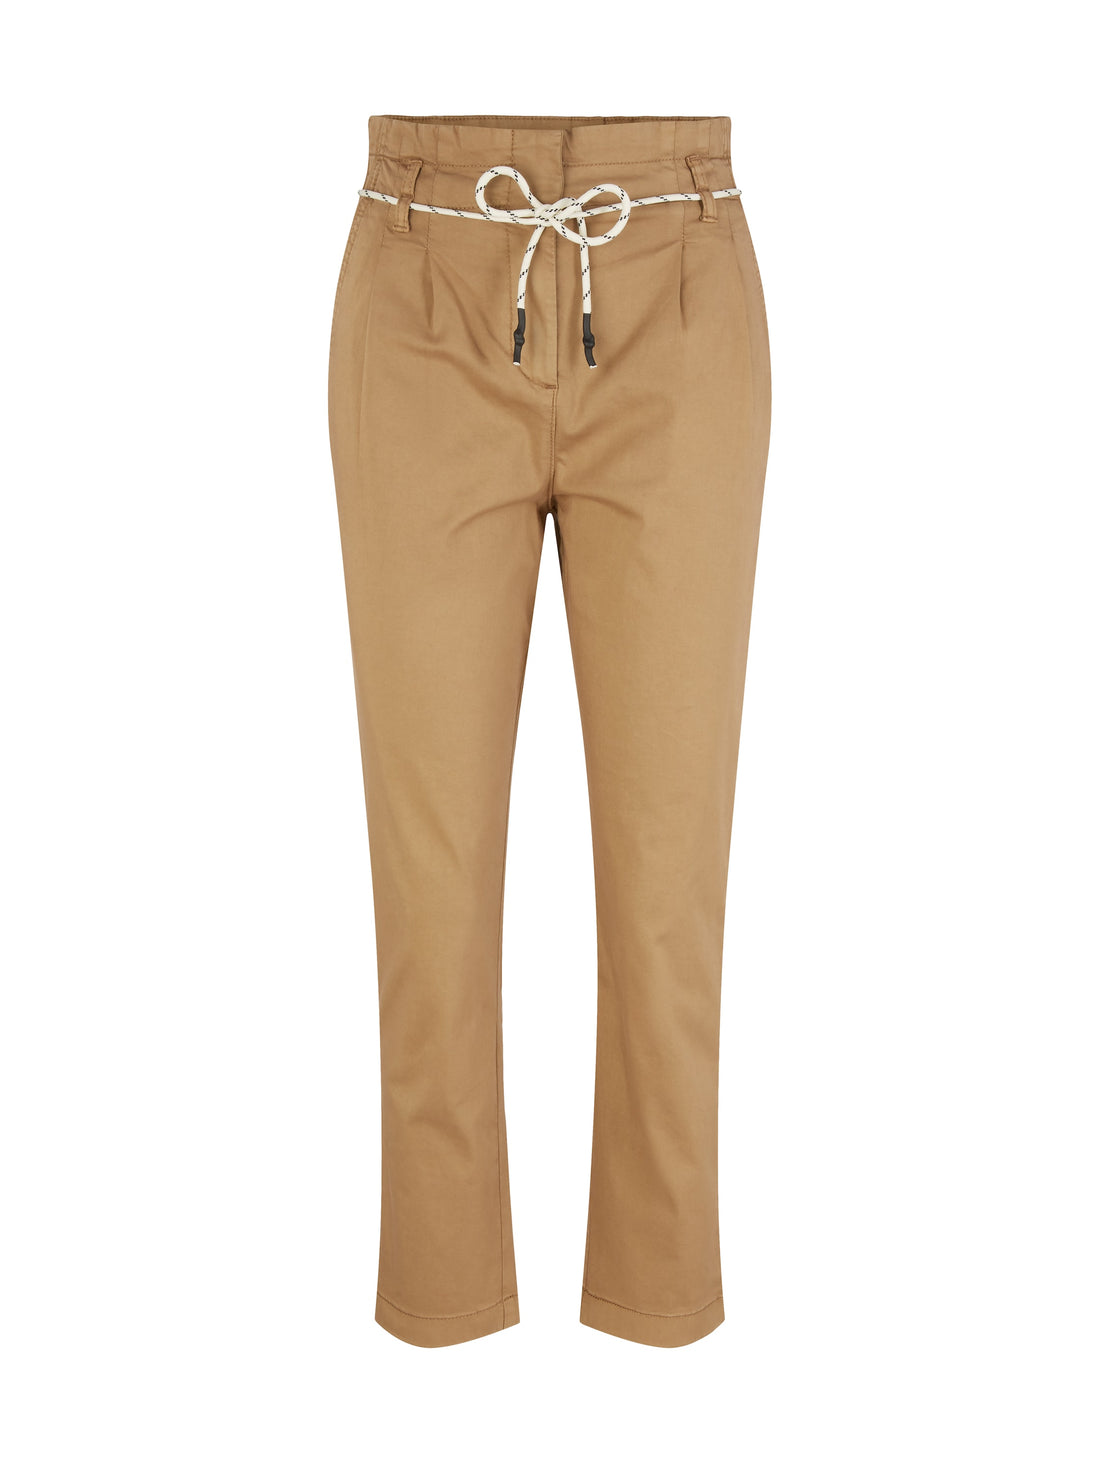 Sand Beige Tapered Trousers With Lace Belt